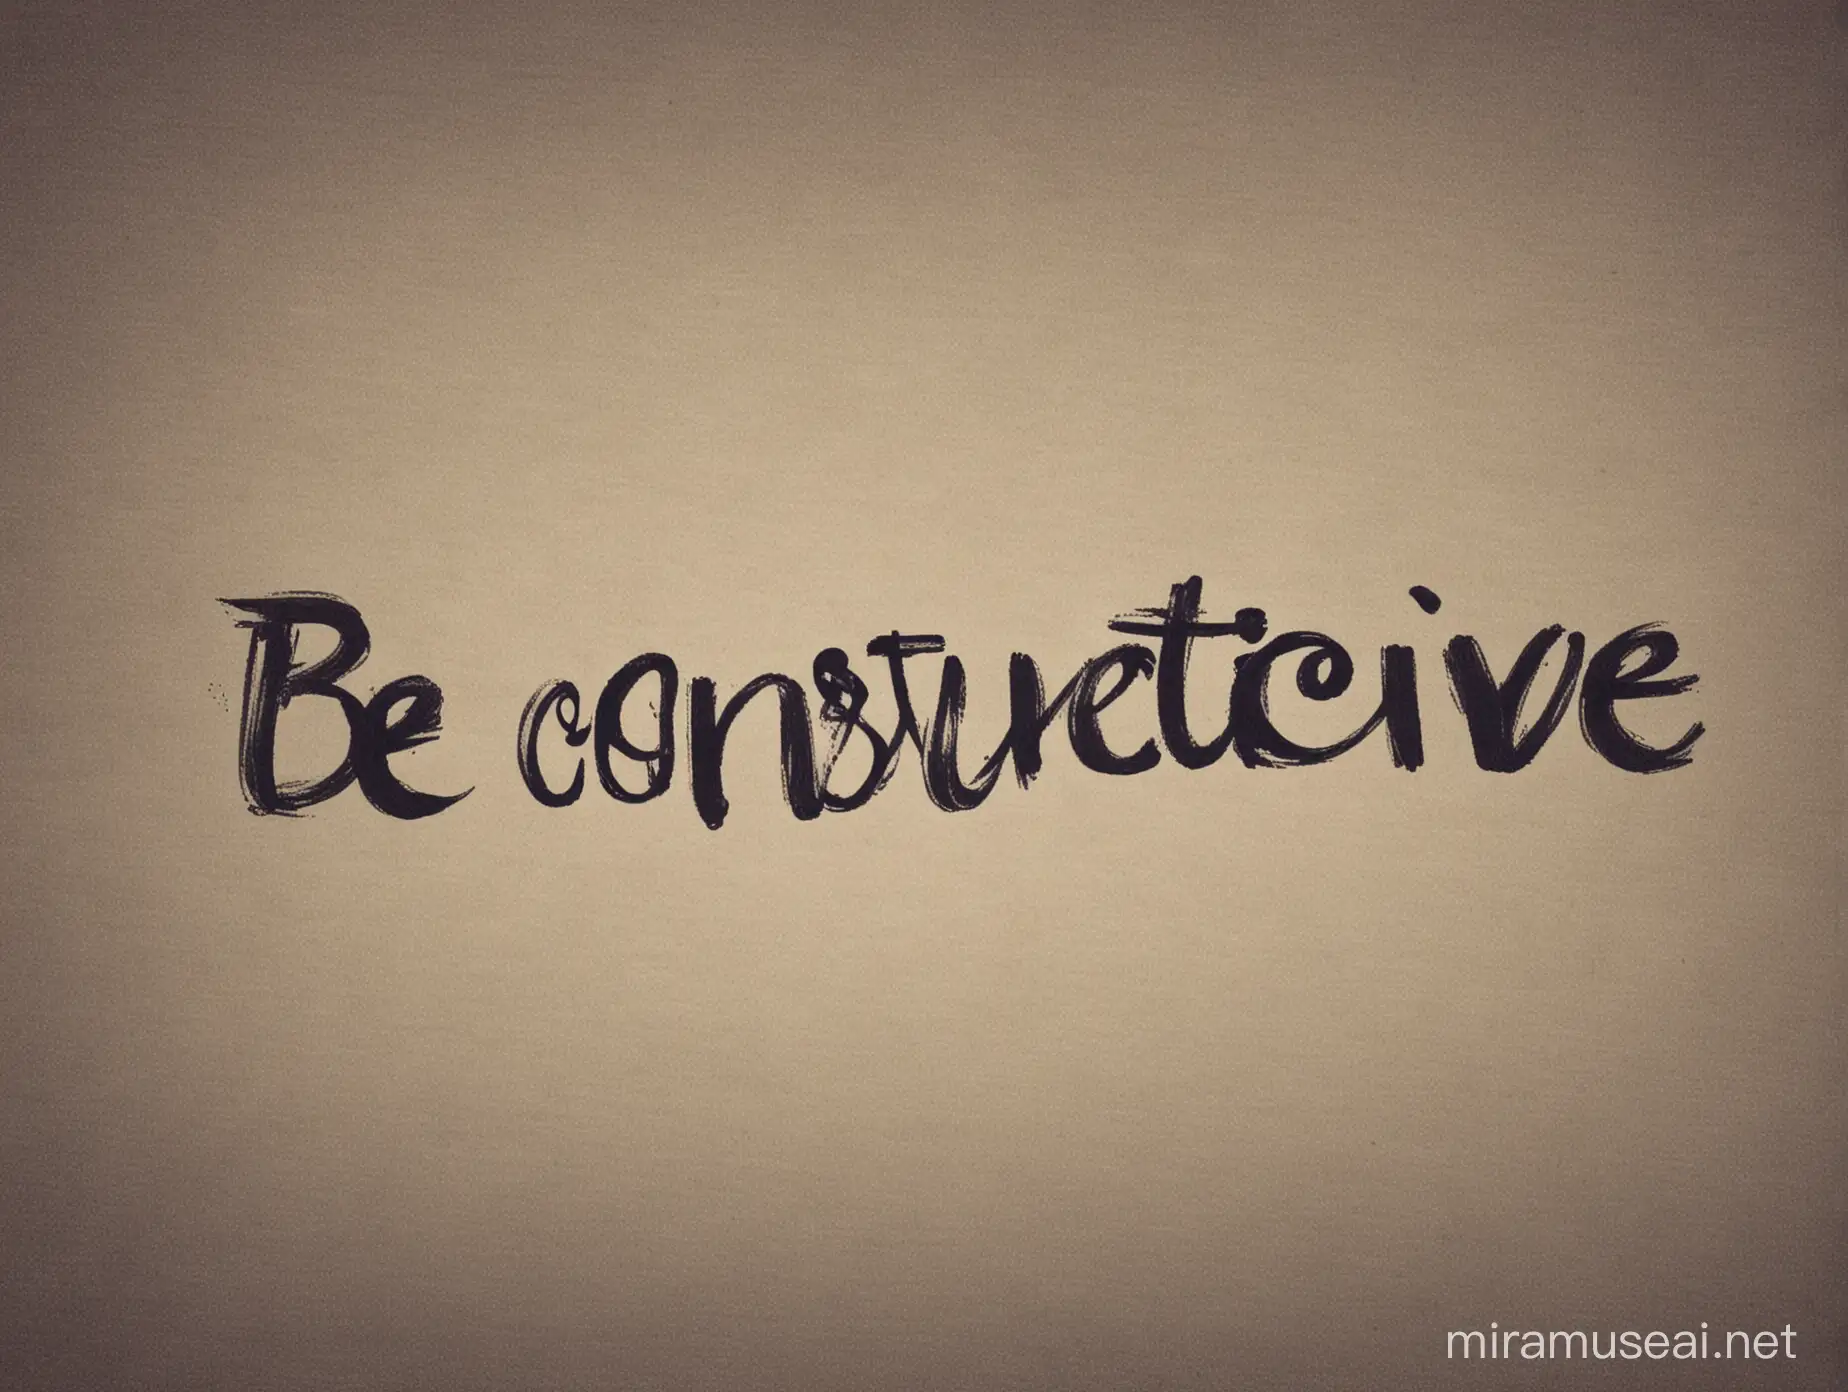 BE CONSRUCTIVE